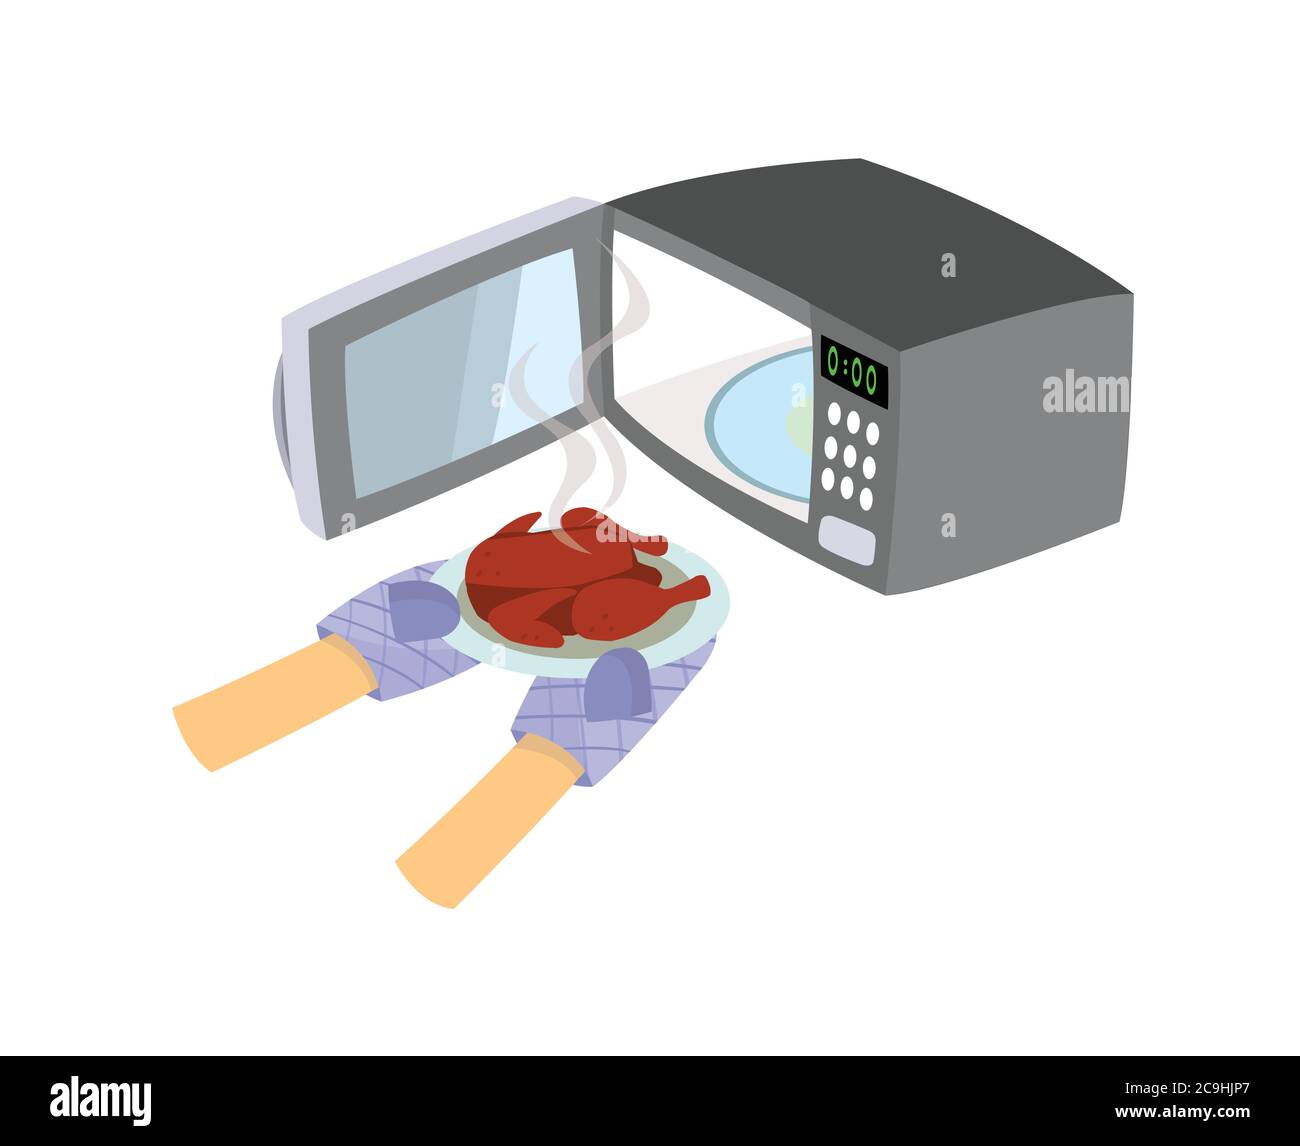 Microwave with open door. Wear gloves to remove the chicken from the microwave. Stock Vector